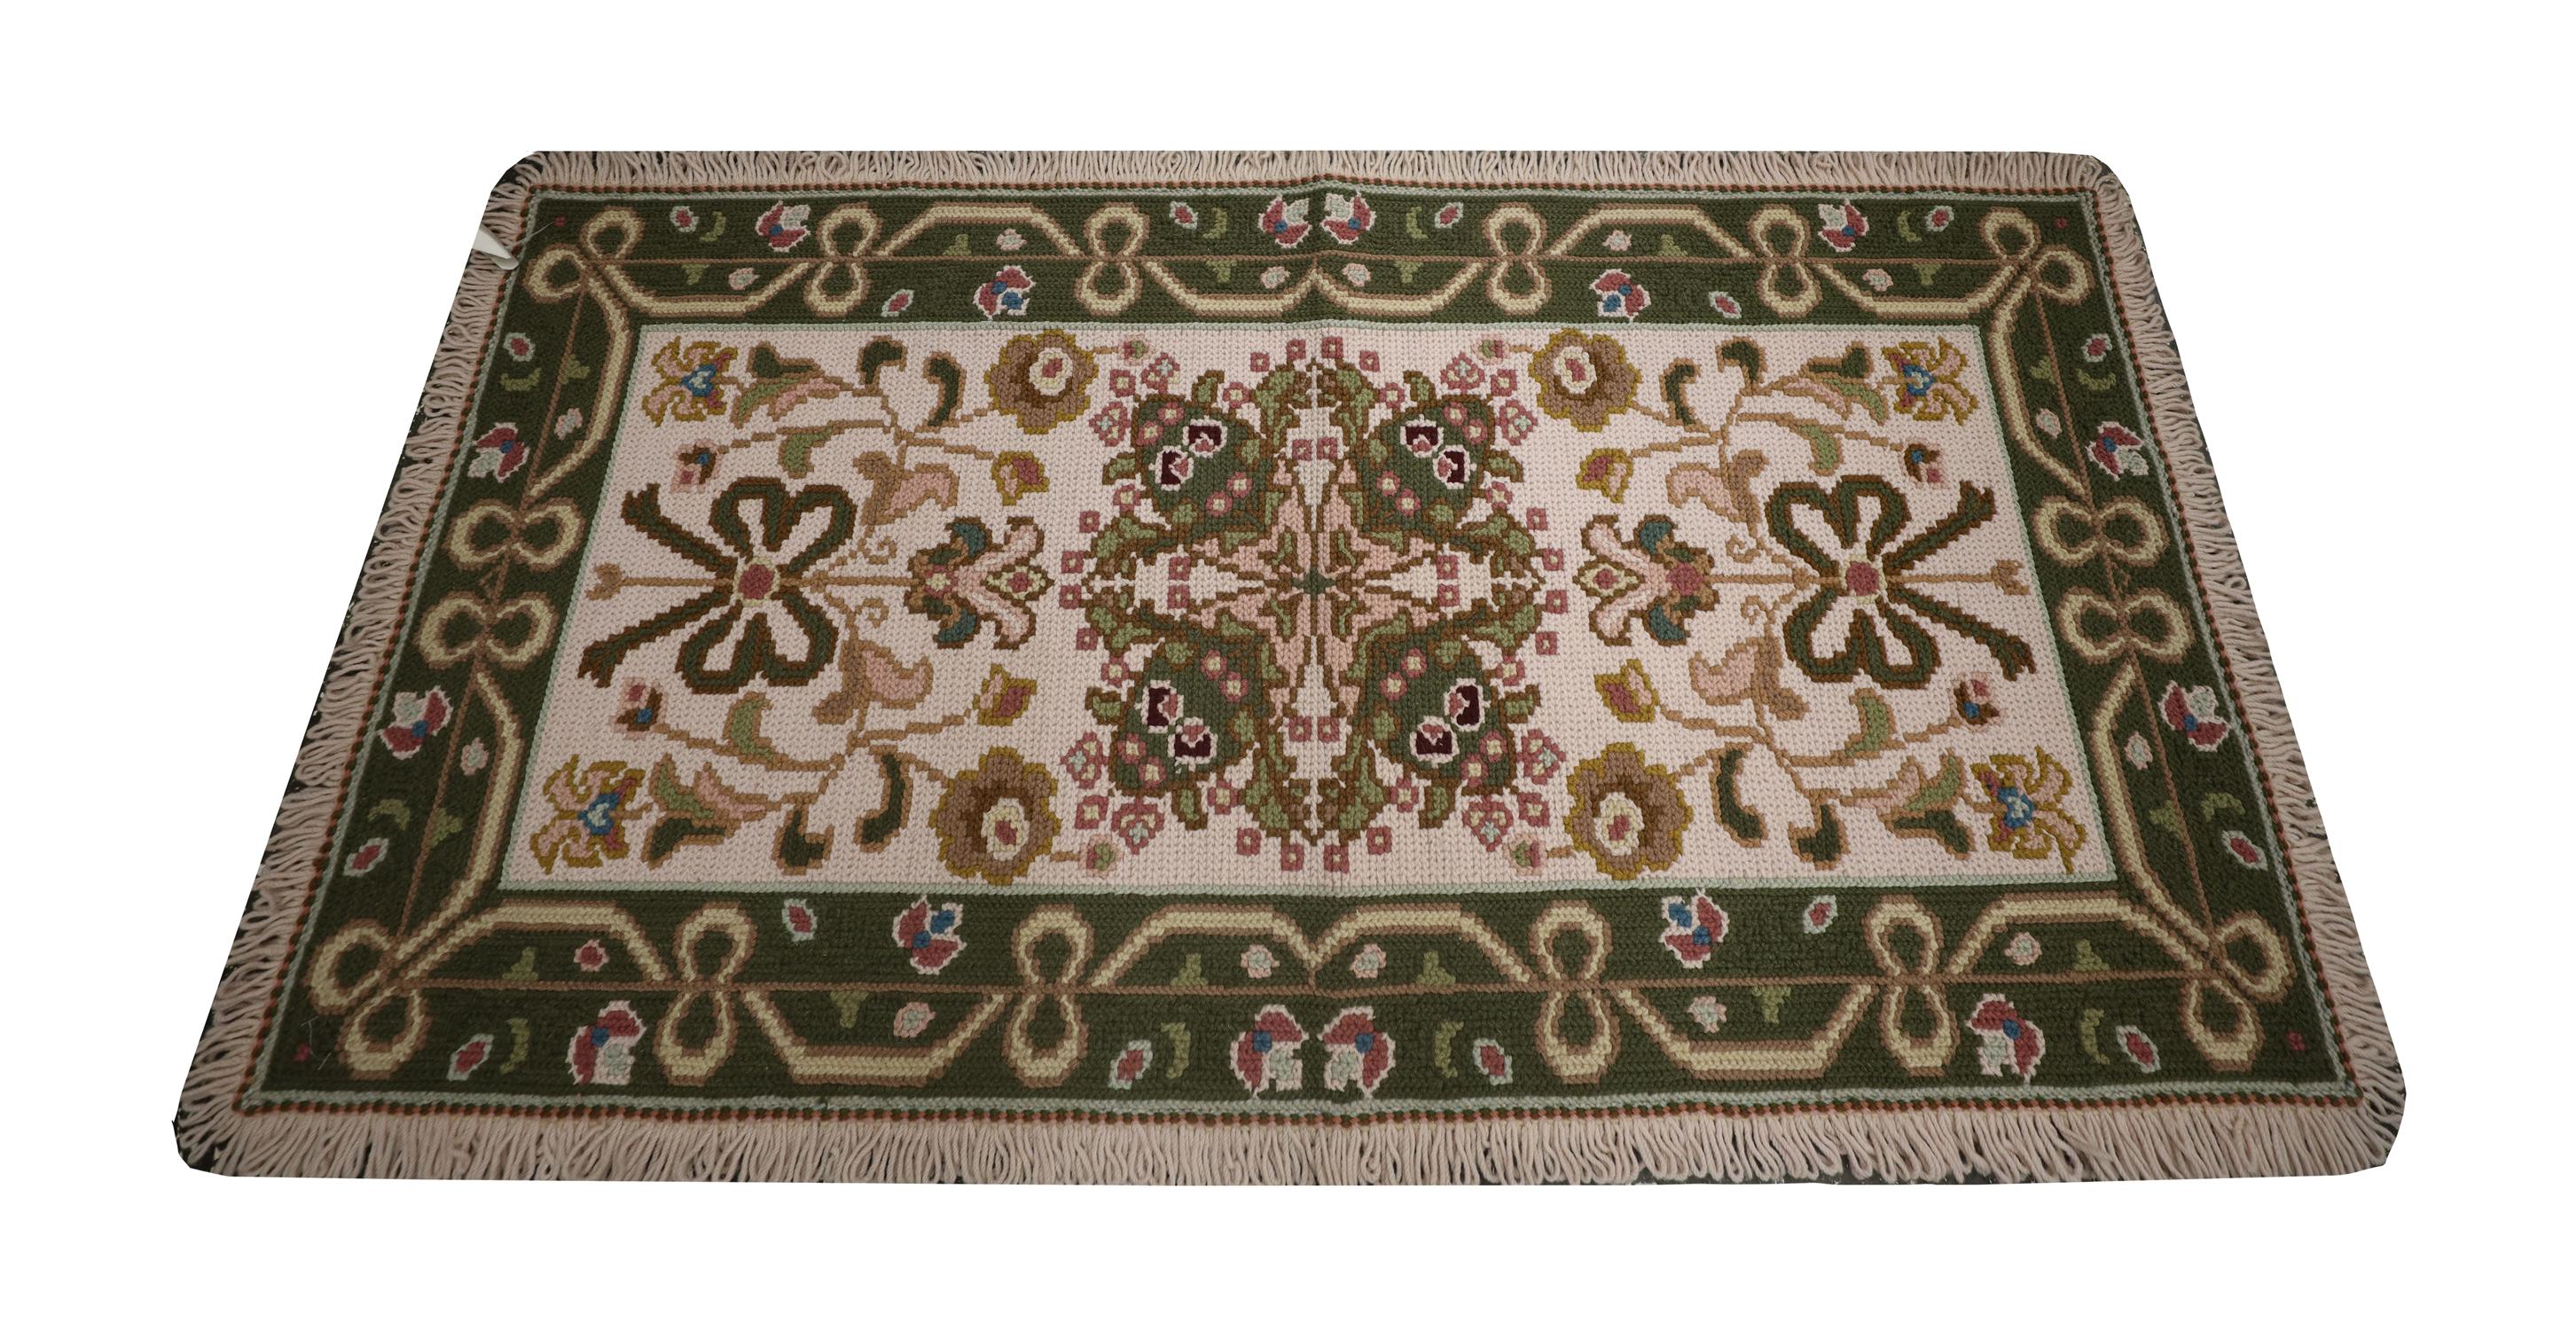 Are you on the lookout for a new carpet to enhance your living room or bedroom? This Beautiful rug could make the perfect accessory. This elegant wool needlepoint is a classic example of a modern Portuguese style rug woven by hand in China in the